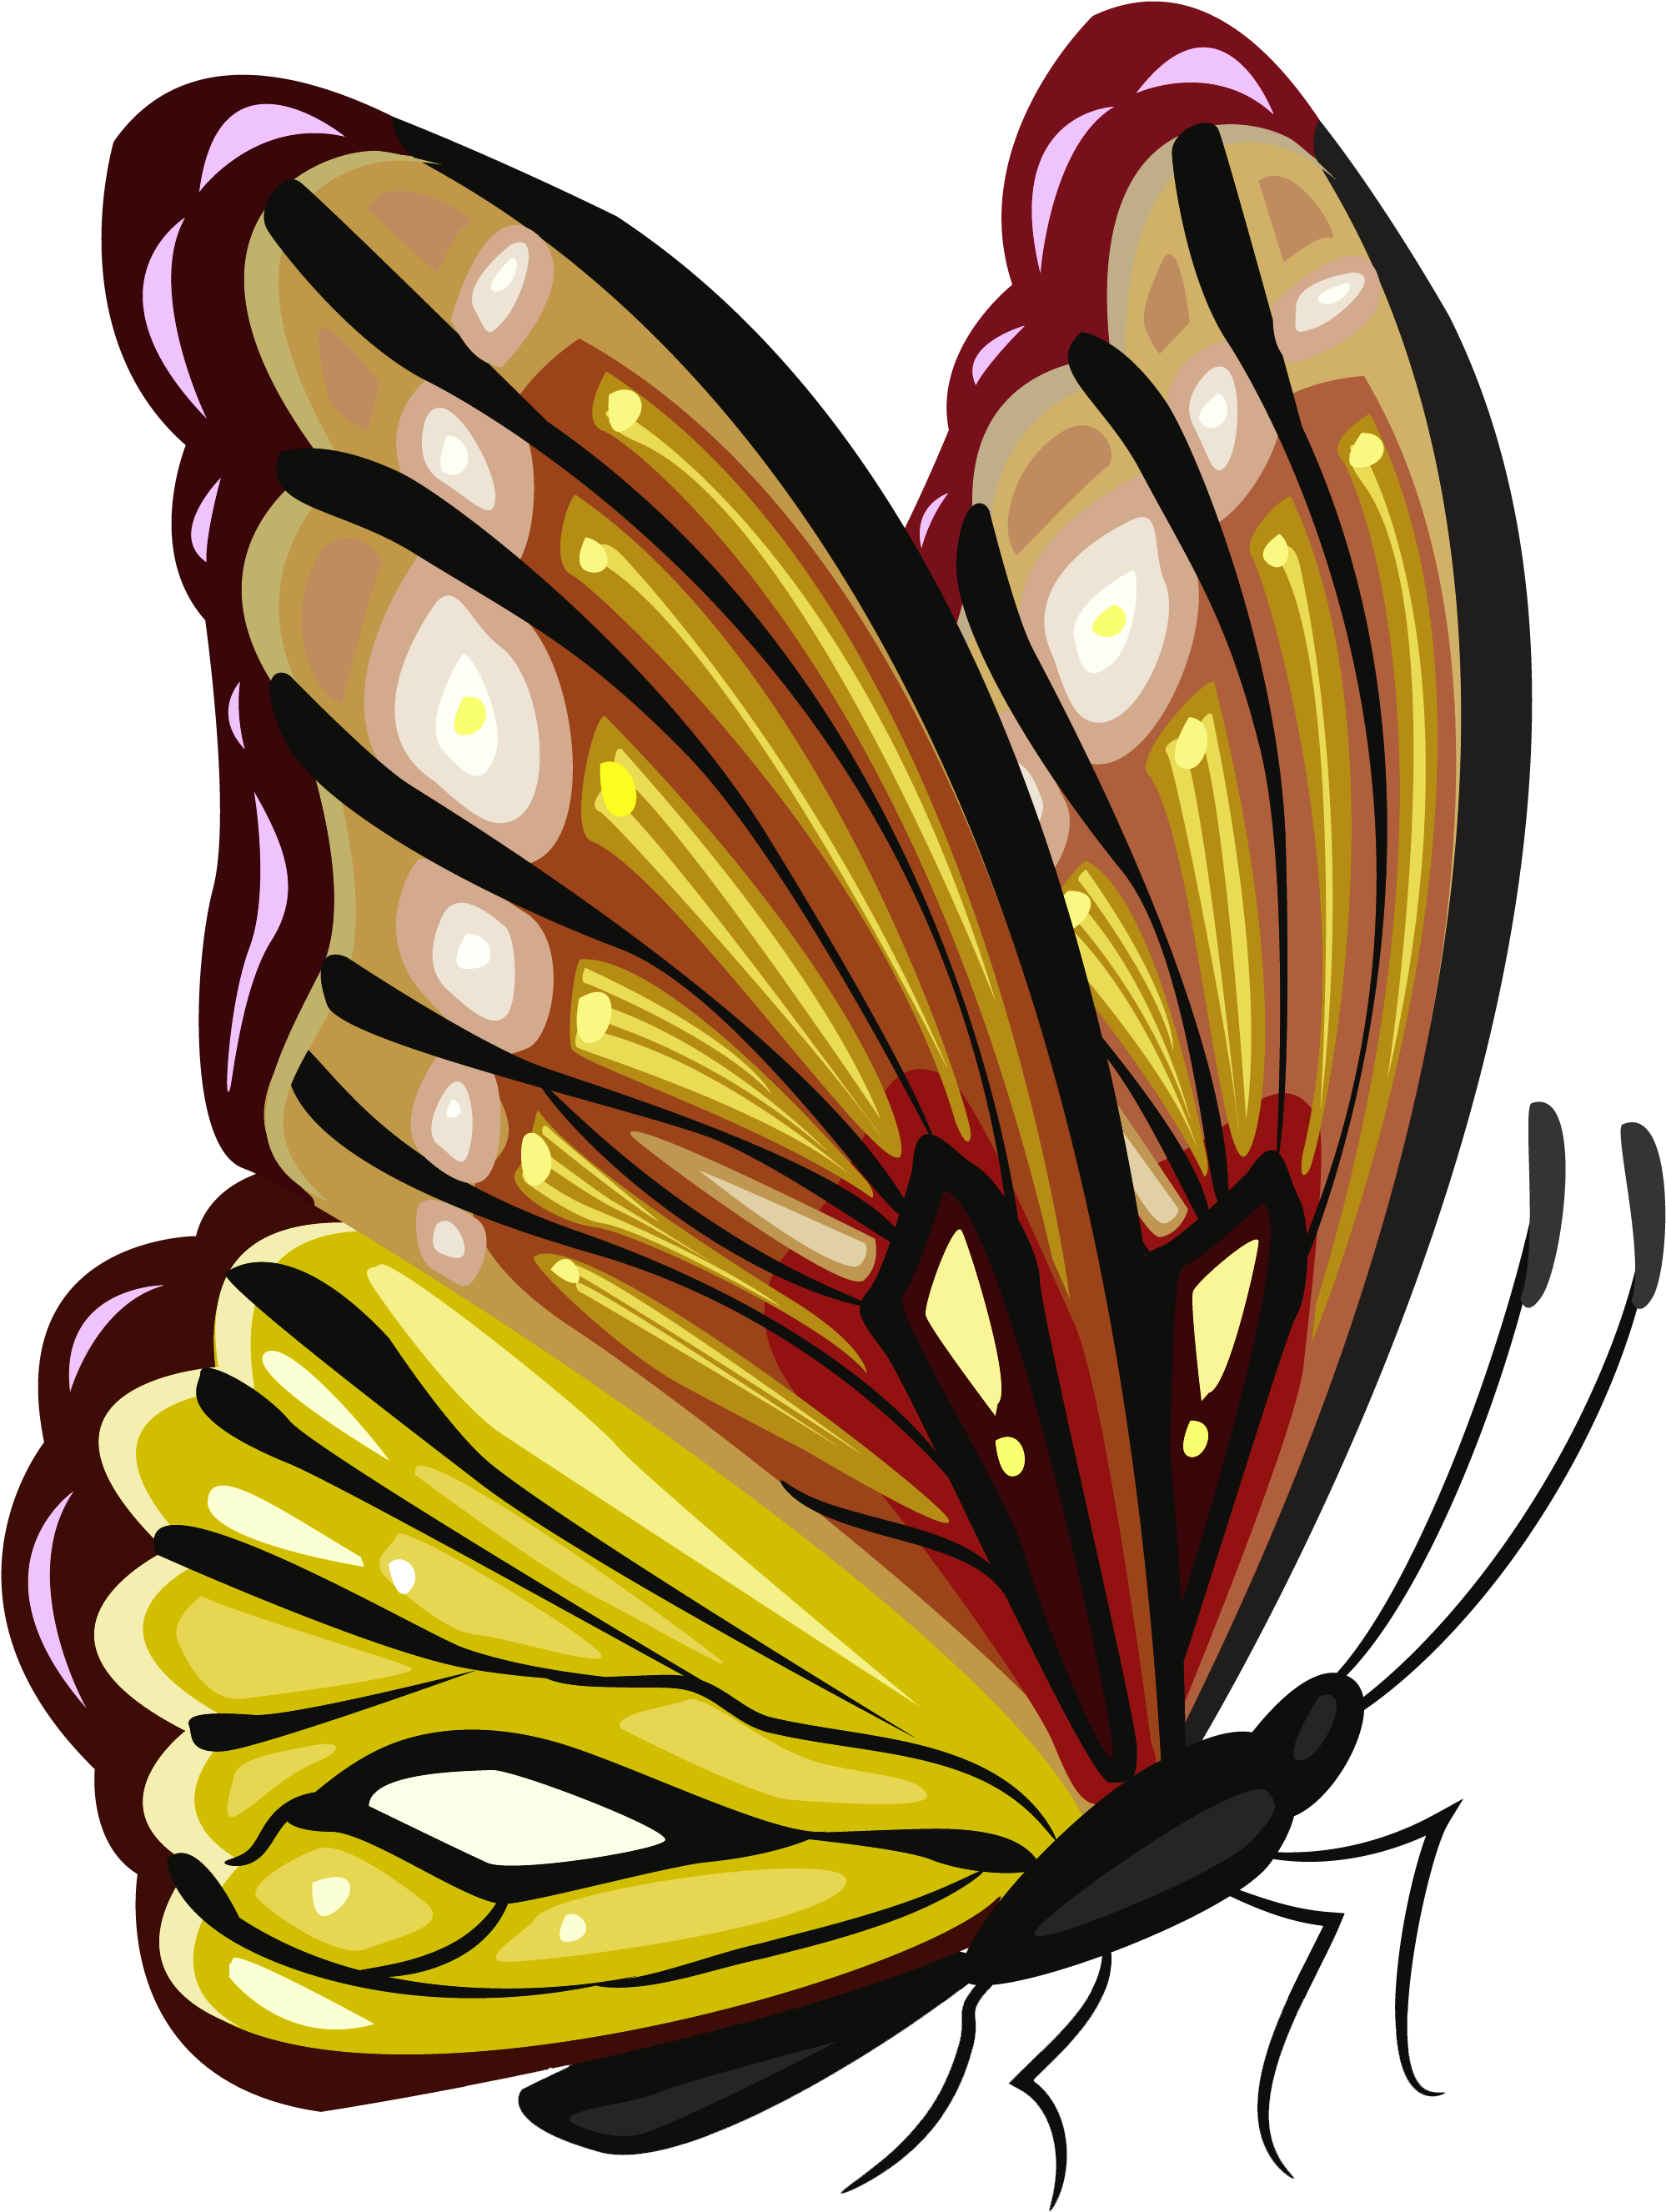 Monarch Butterfly PNG High Quality Image